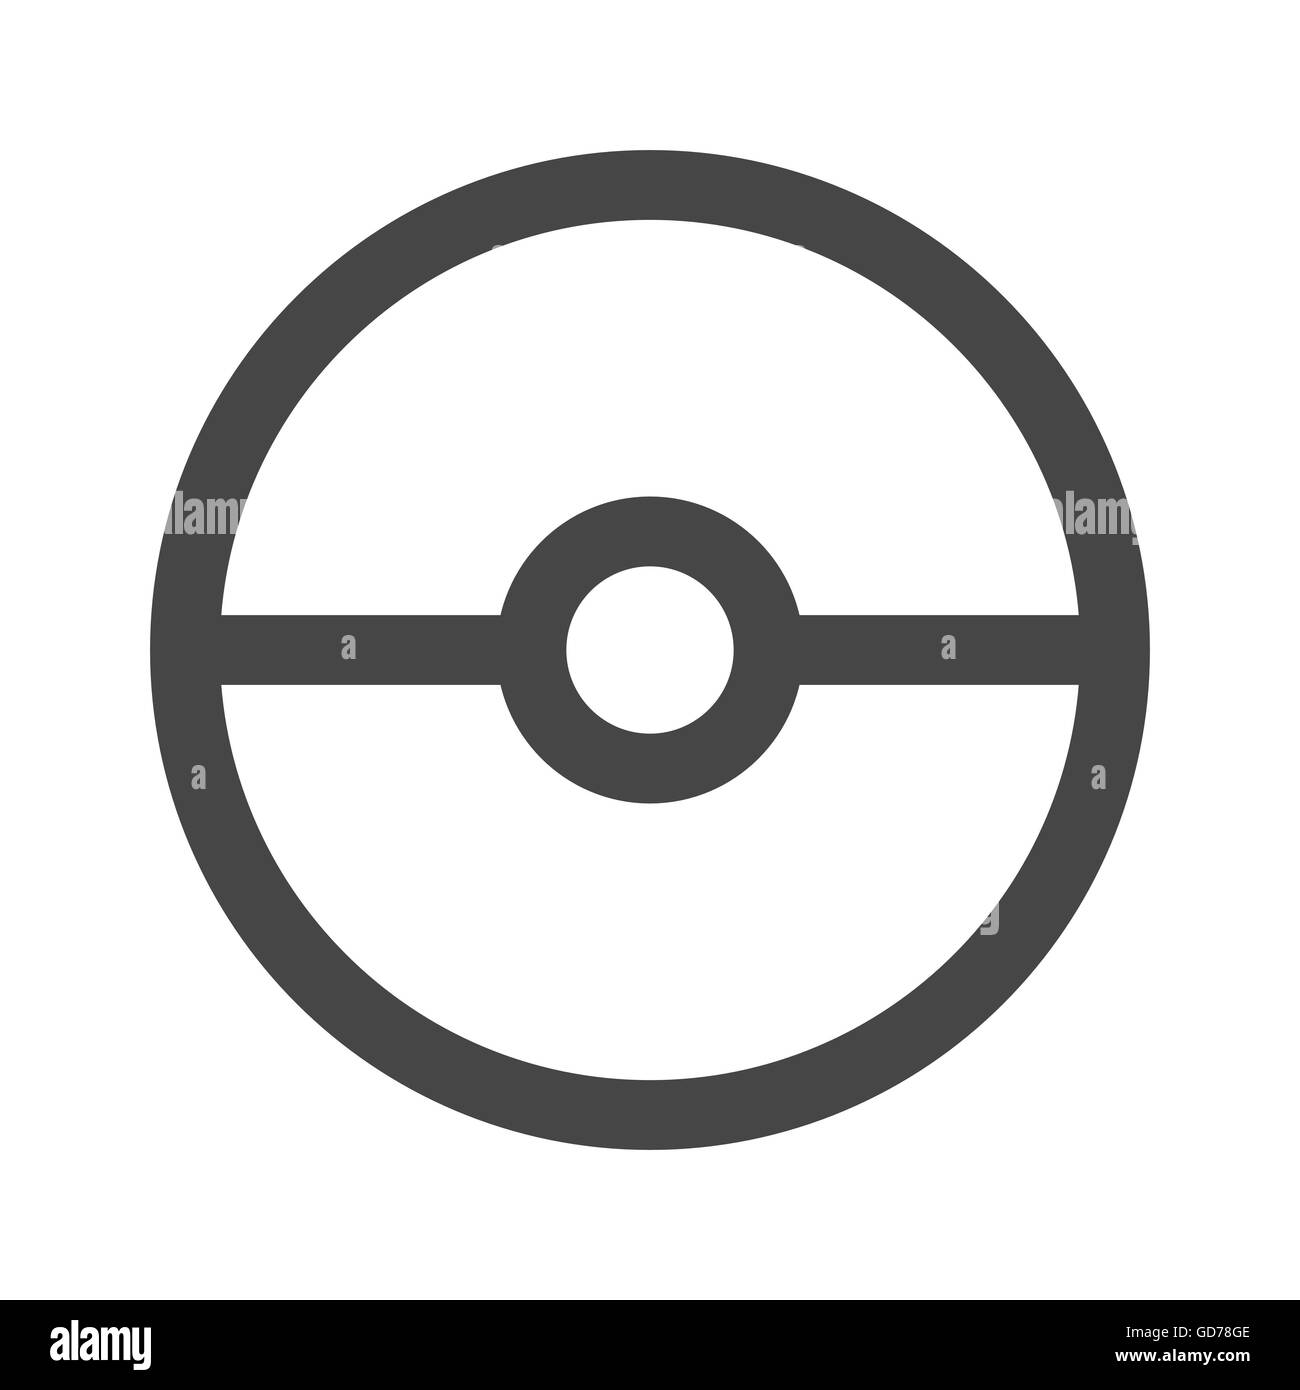 Pokeball Vector Images (over 380)